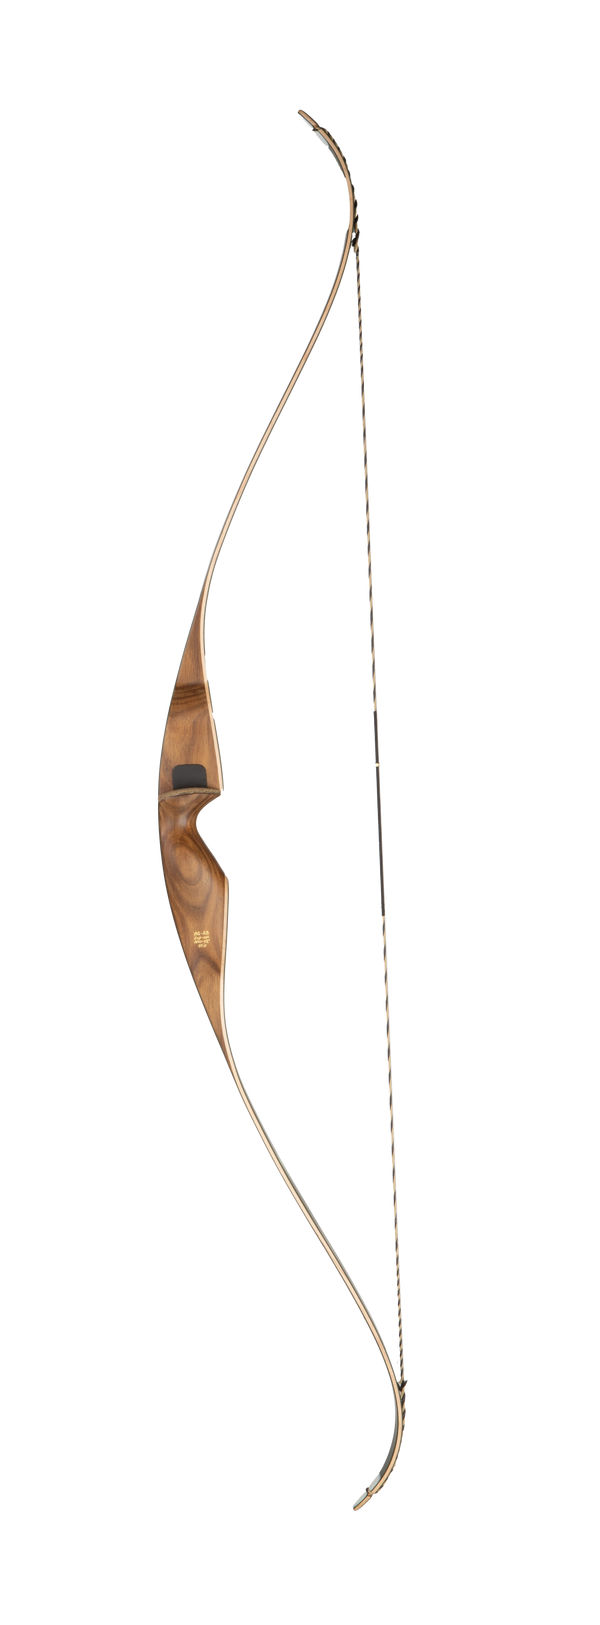 Bear Archery 90th Anniversary Grizzly Recurve Bow